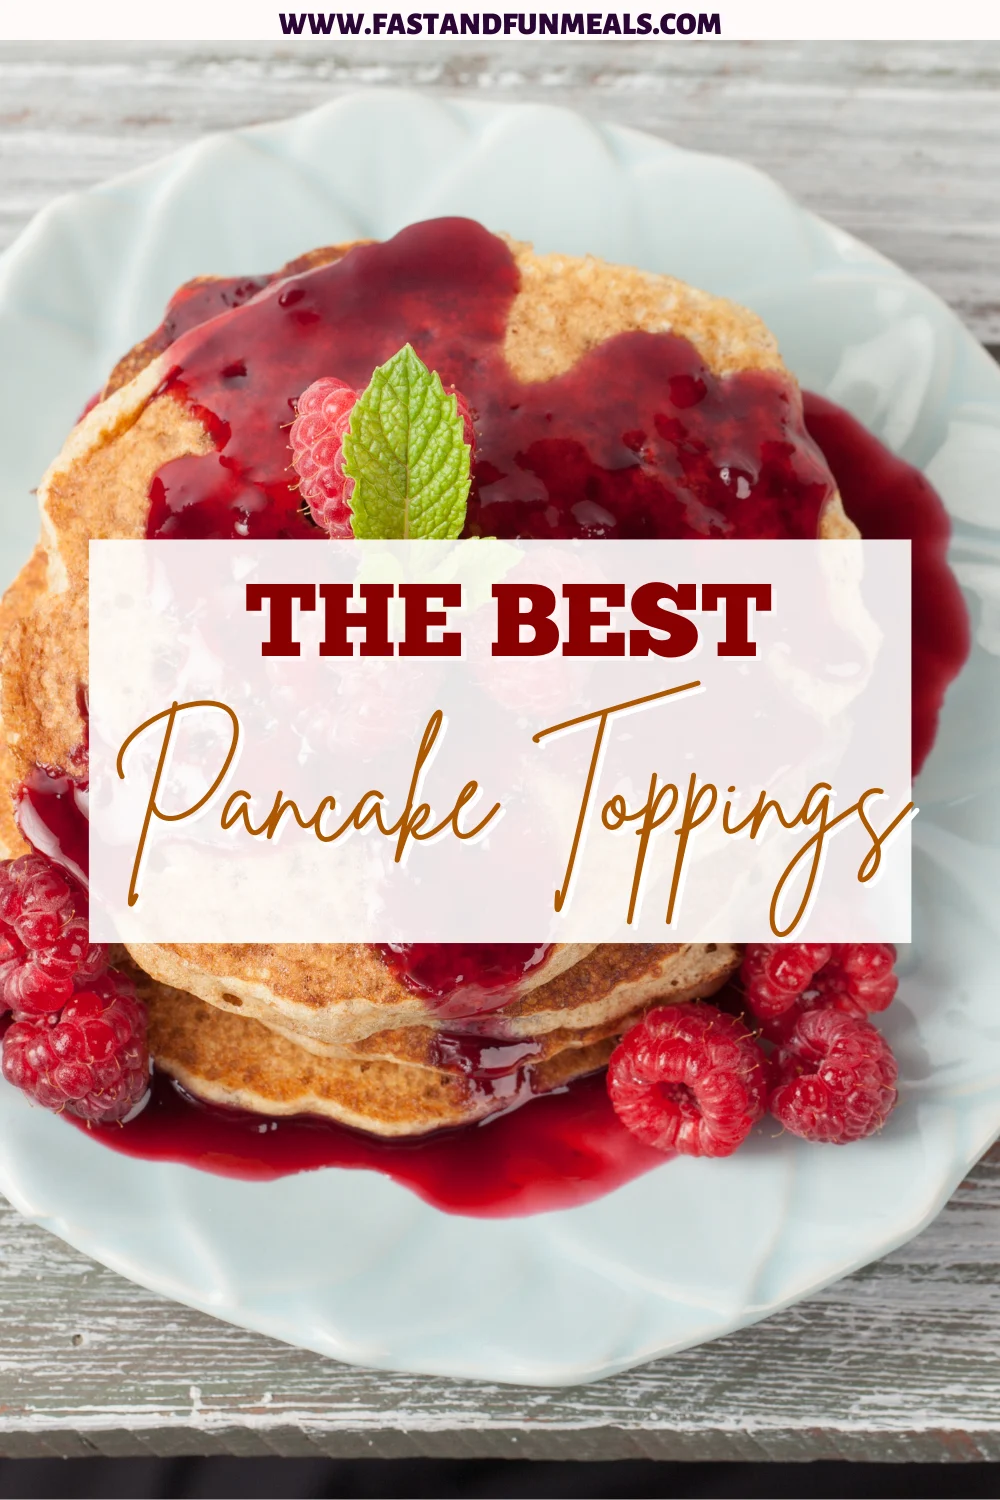 The Best Pancake Toppings to Try! » Fast and Fun Meals